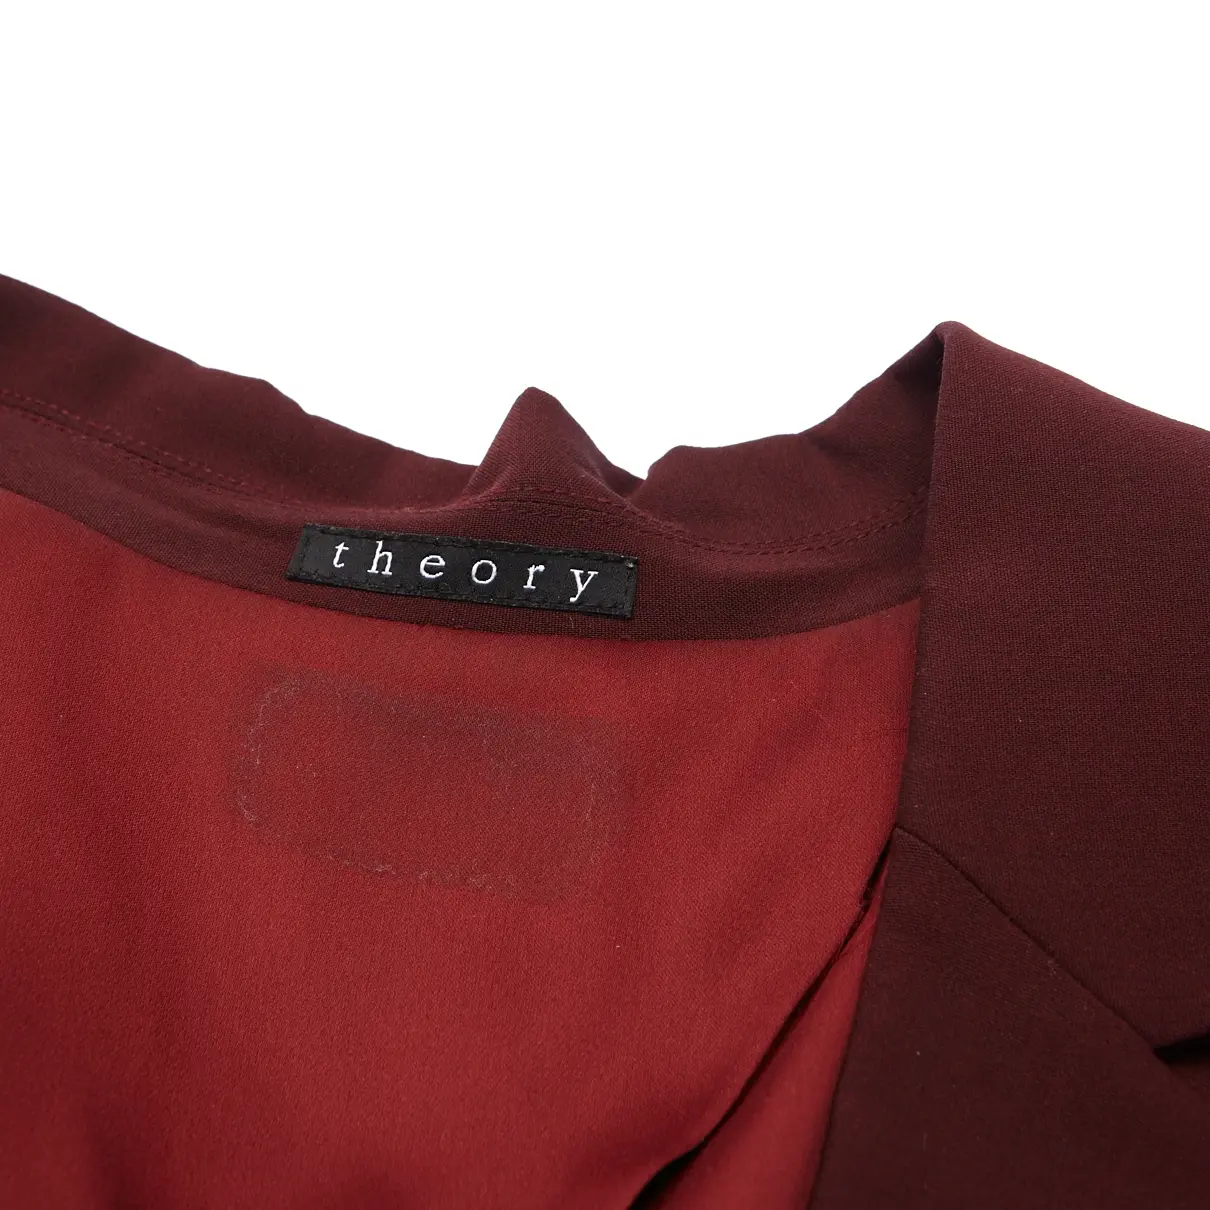 Buy Theory Jacket online